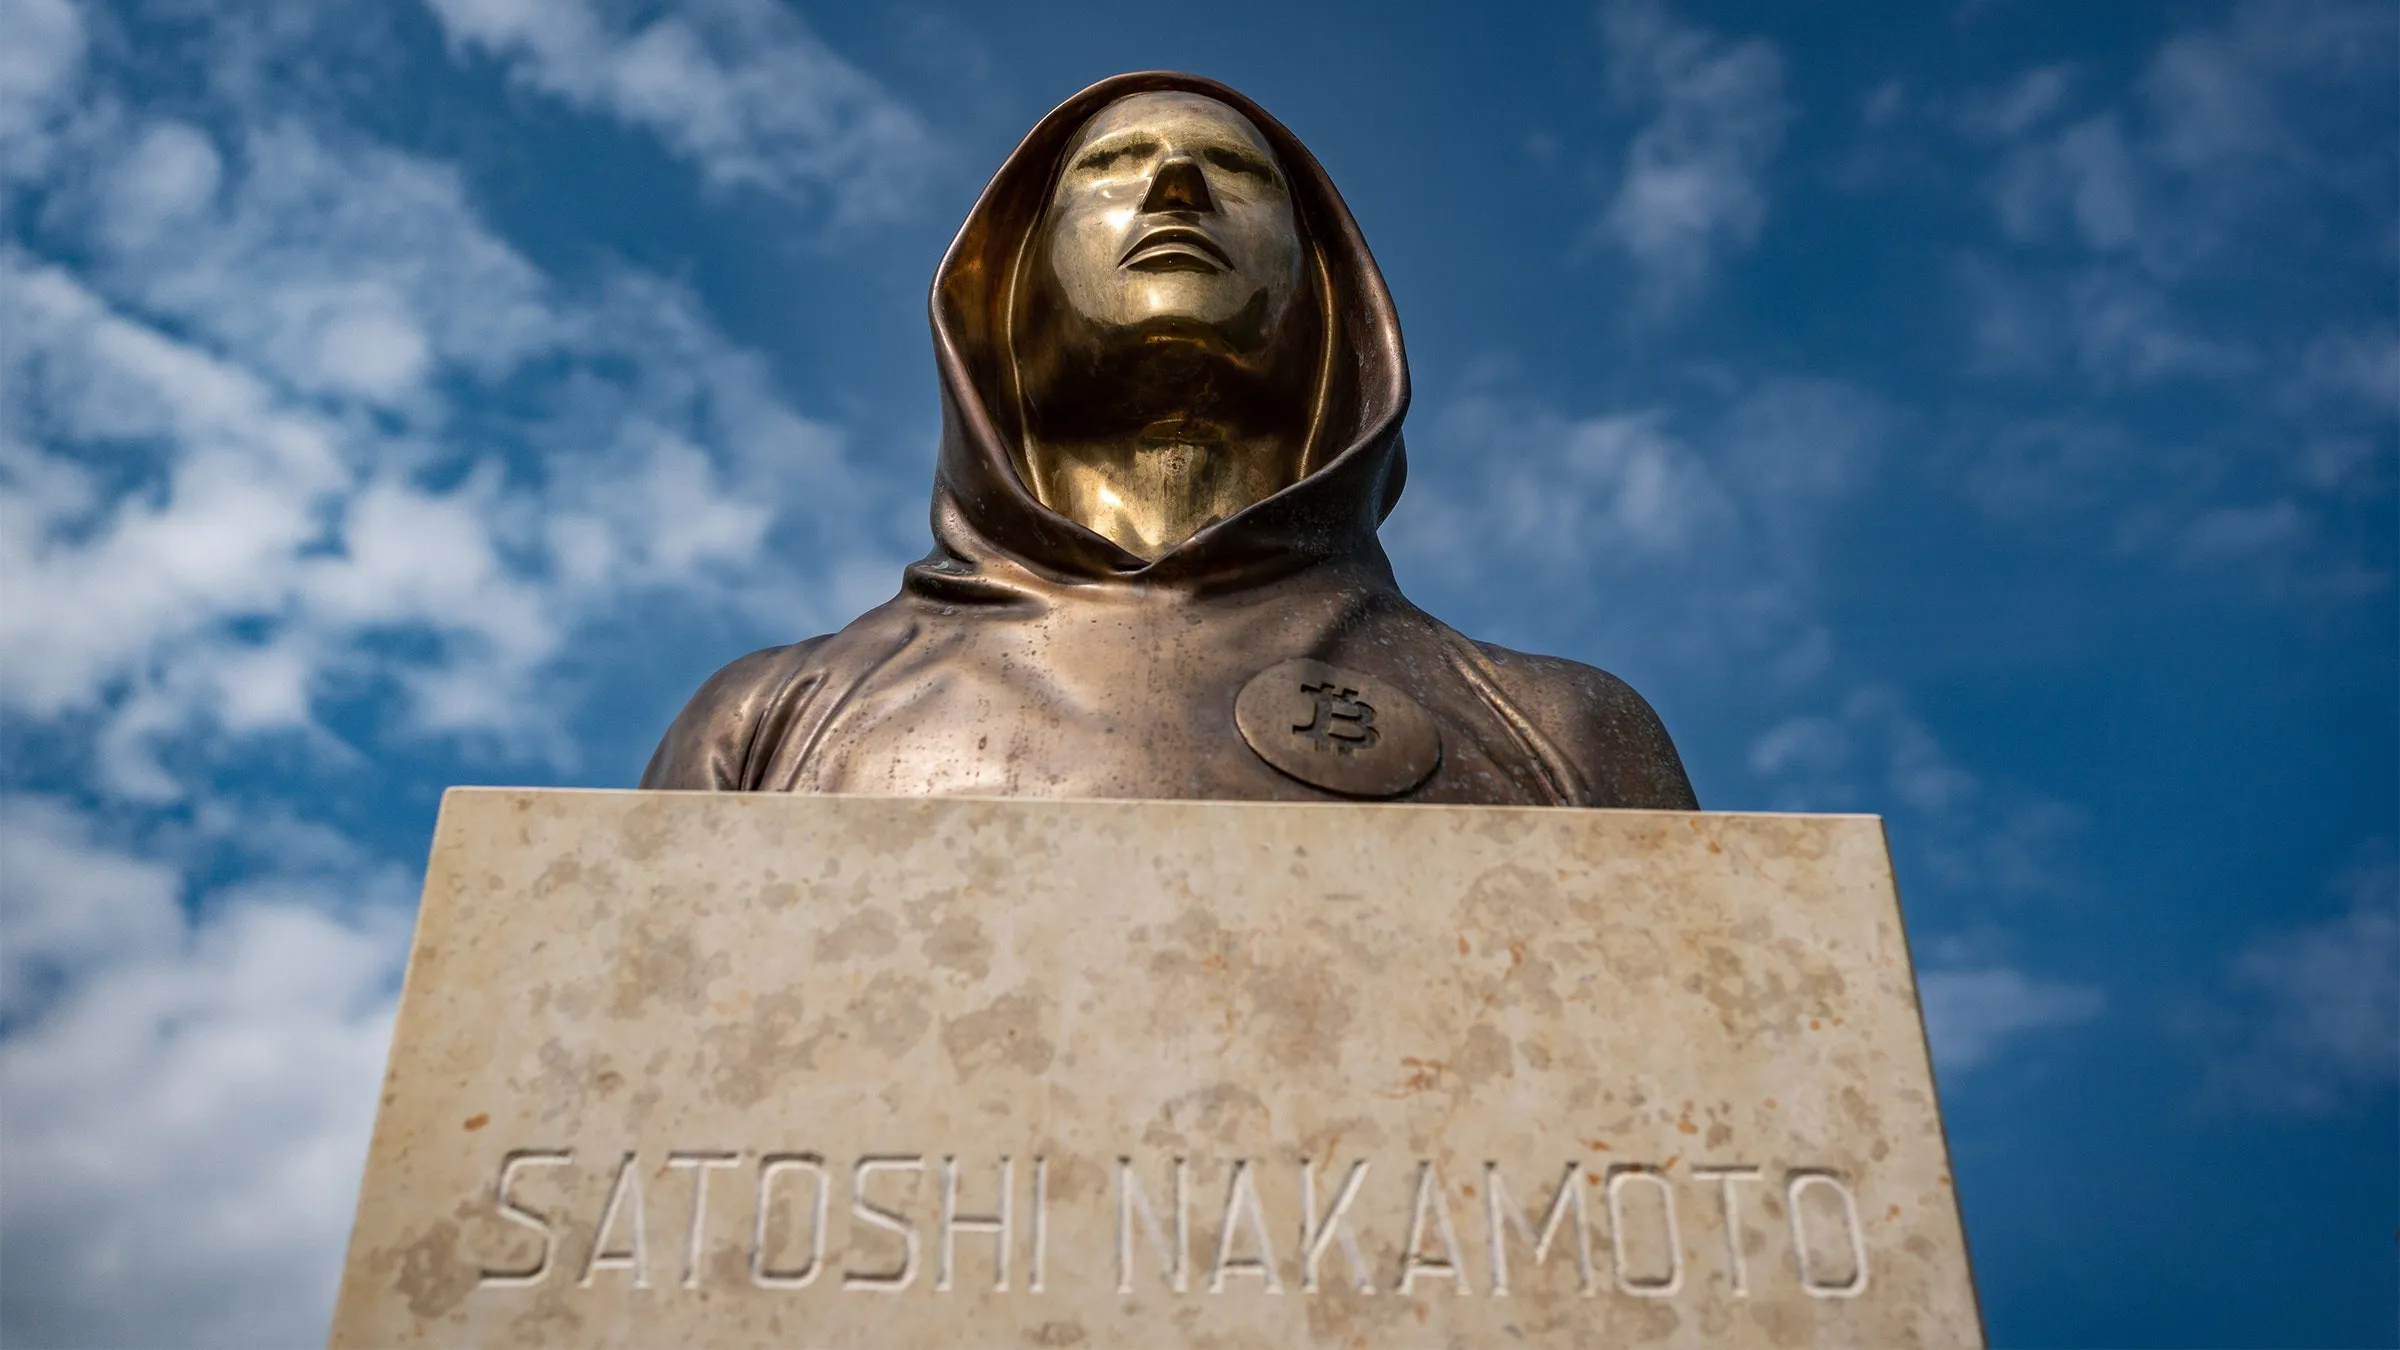 A statue of Satoshi Nakamoto, founder of Bitcoin and Blockchain technology, created by Reka Gergely and Tamas Gilly and installed in Budapest. Image: Istvan Csak / Shutterstock.com